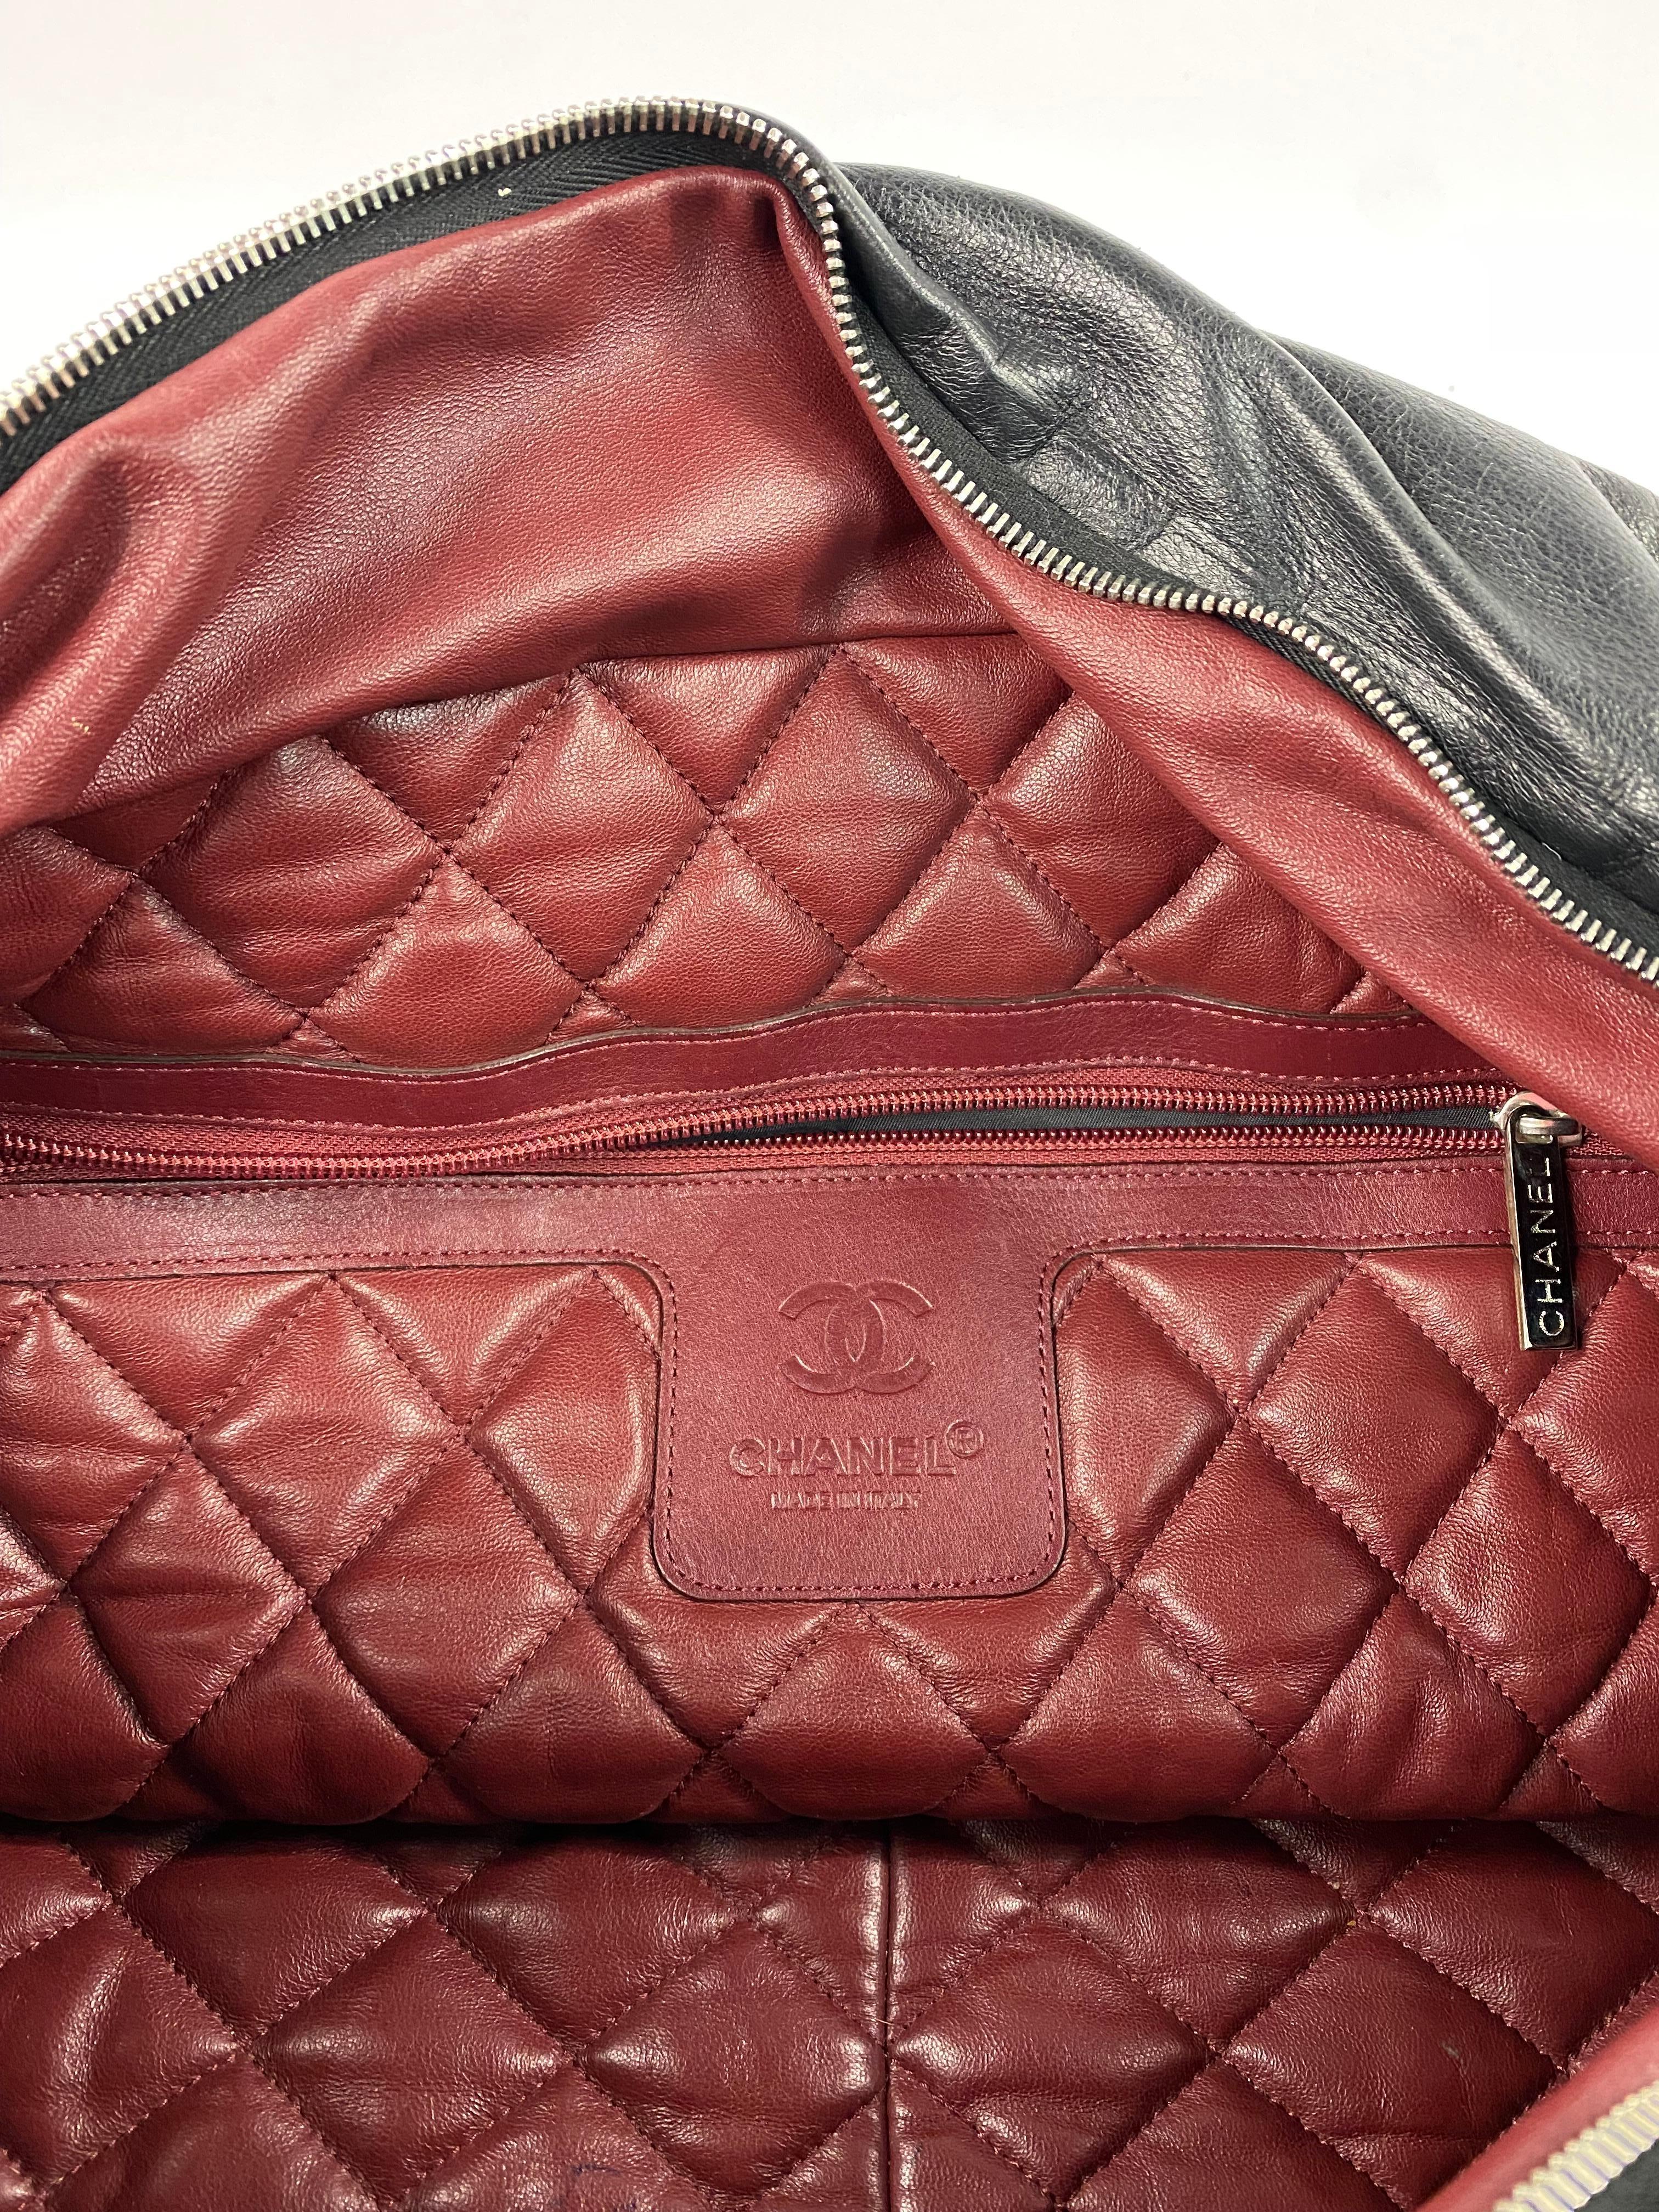 Chanel Coco Cocoon Bowling Black and Red Leather Quilted Tote Handbag 9